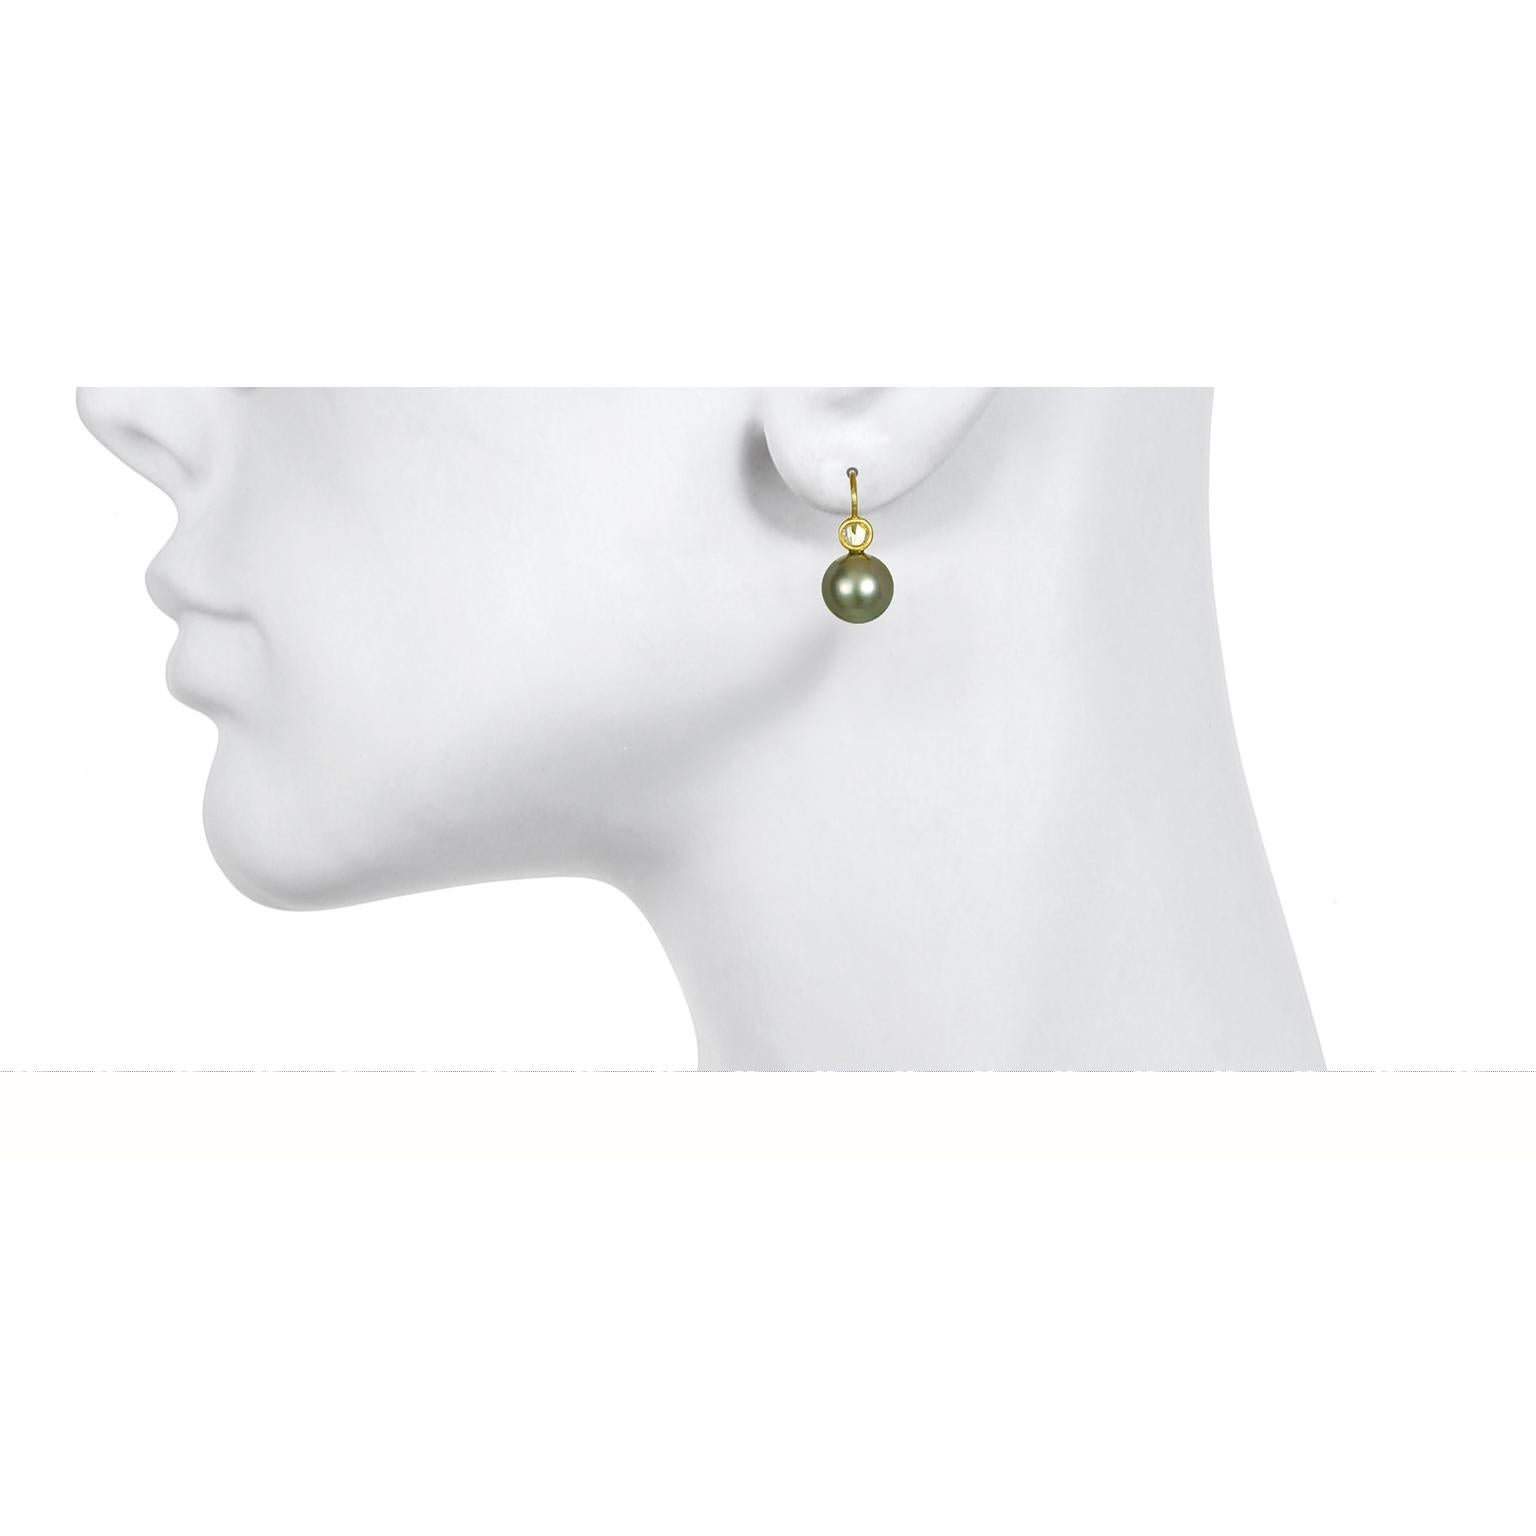 Classic yet with a modern approach, Faye Kim's Pistachio hued Black Tahitian cultured pearl earrings are finished with a pair of white rose cut diamonds.  Coveted and hard to find Pistachio color, perfectly matched in size, color, and luster.